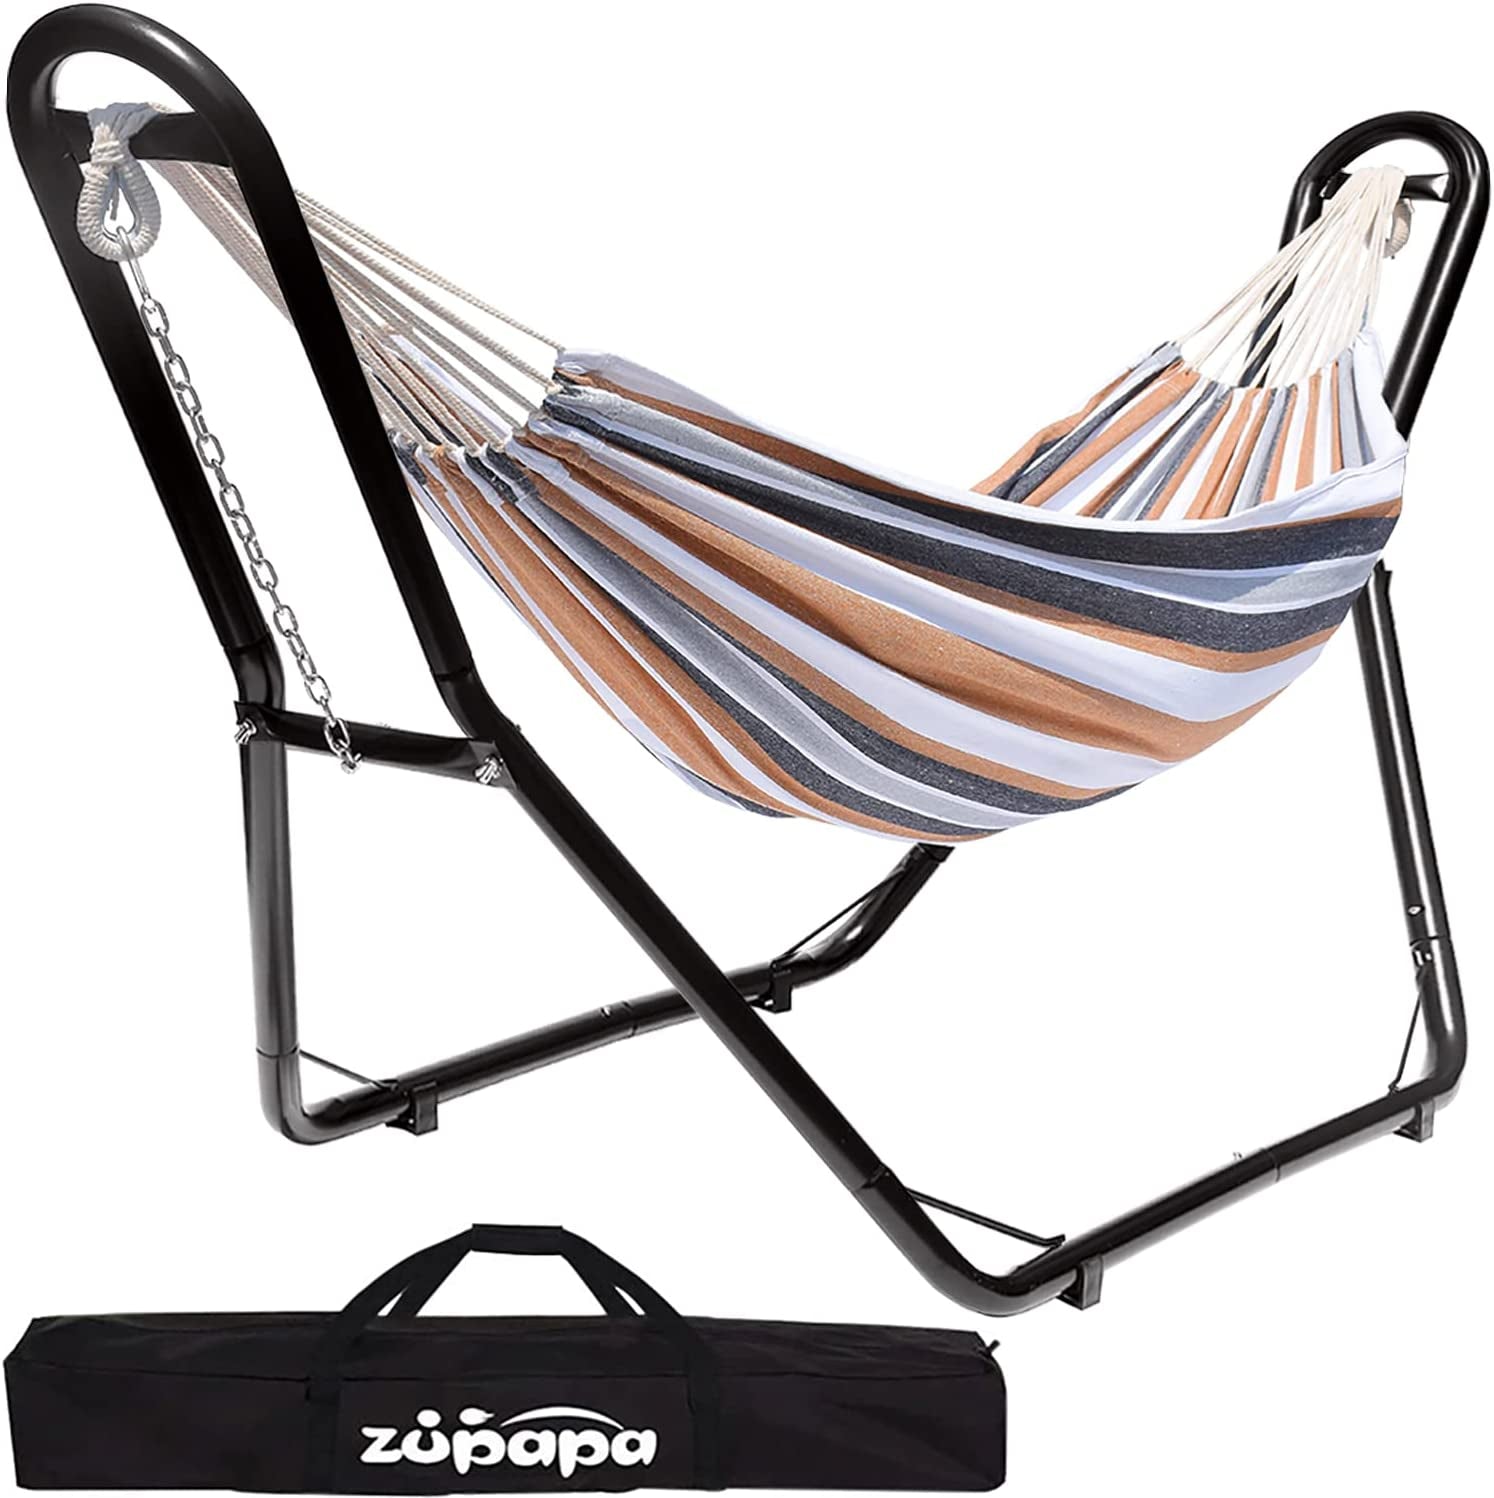 2 Person Hammock With Stand - Garden Hammock For Backyard Camping